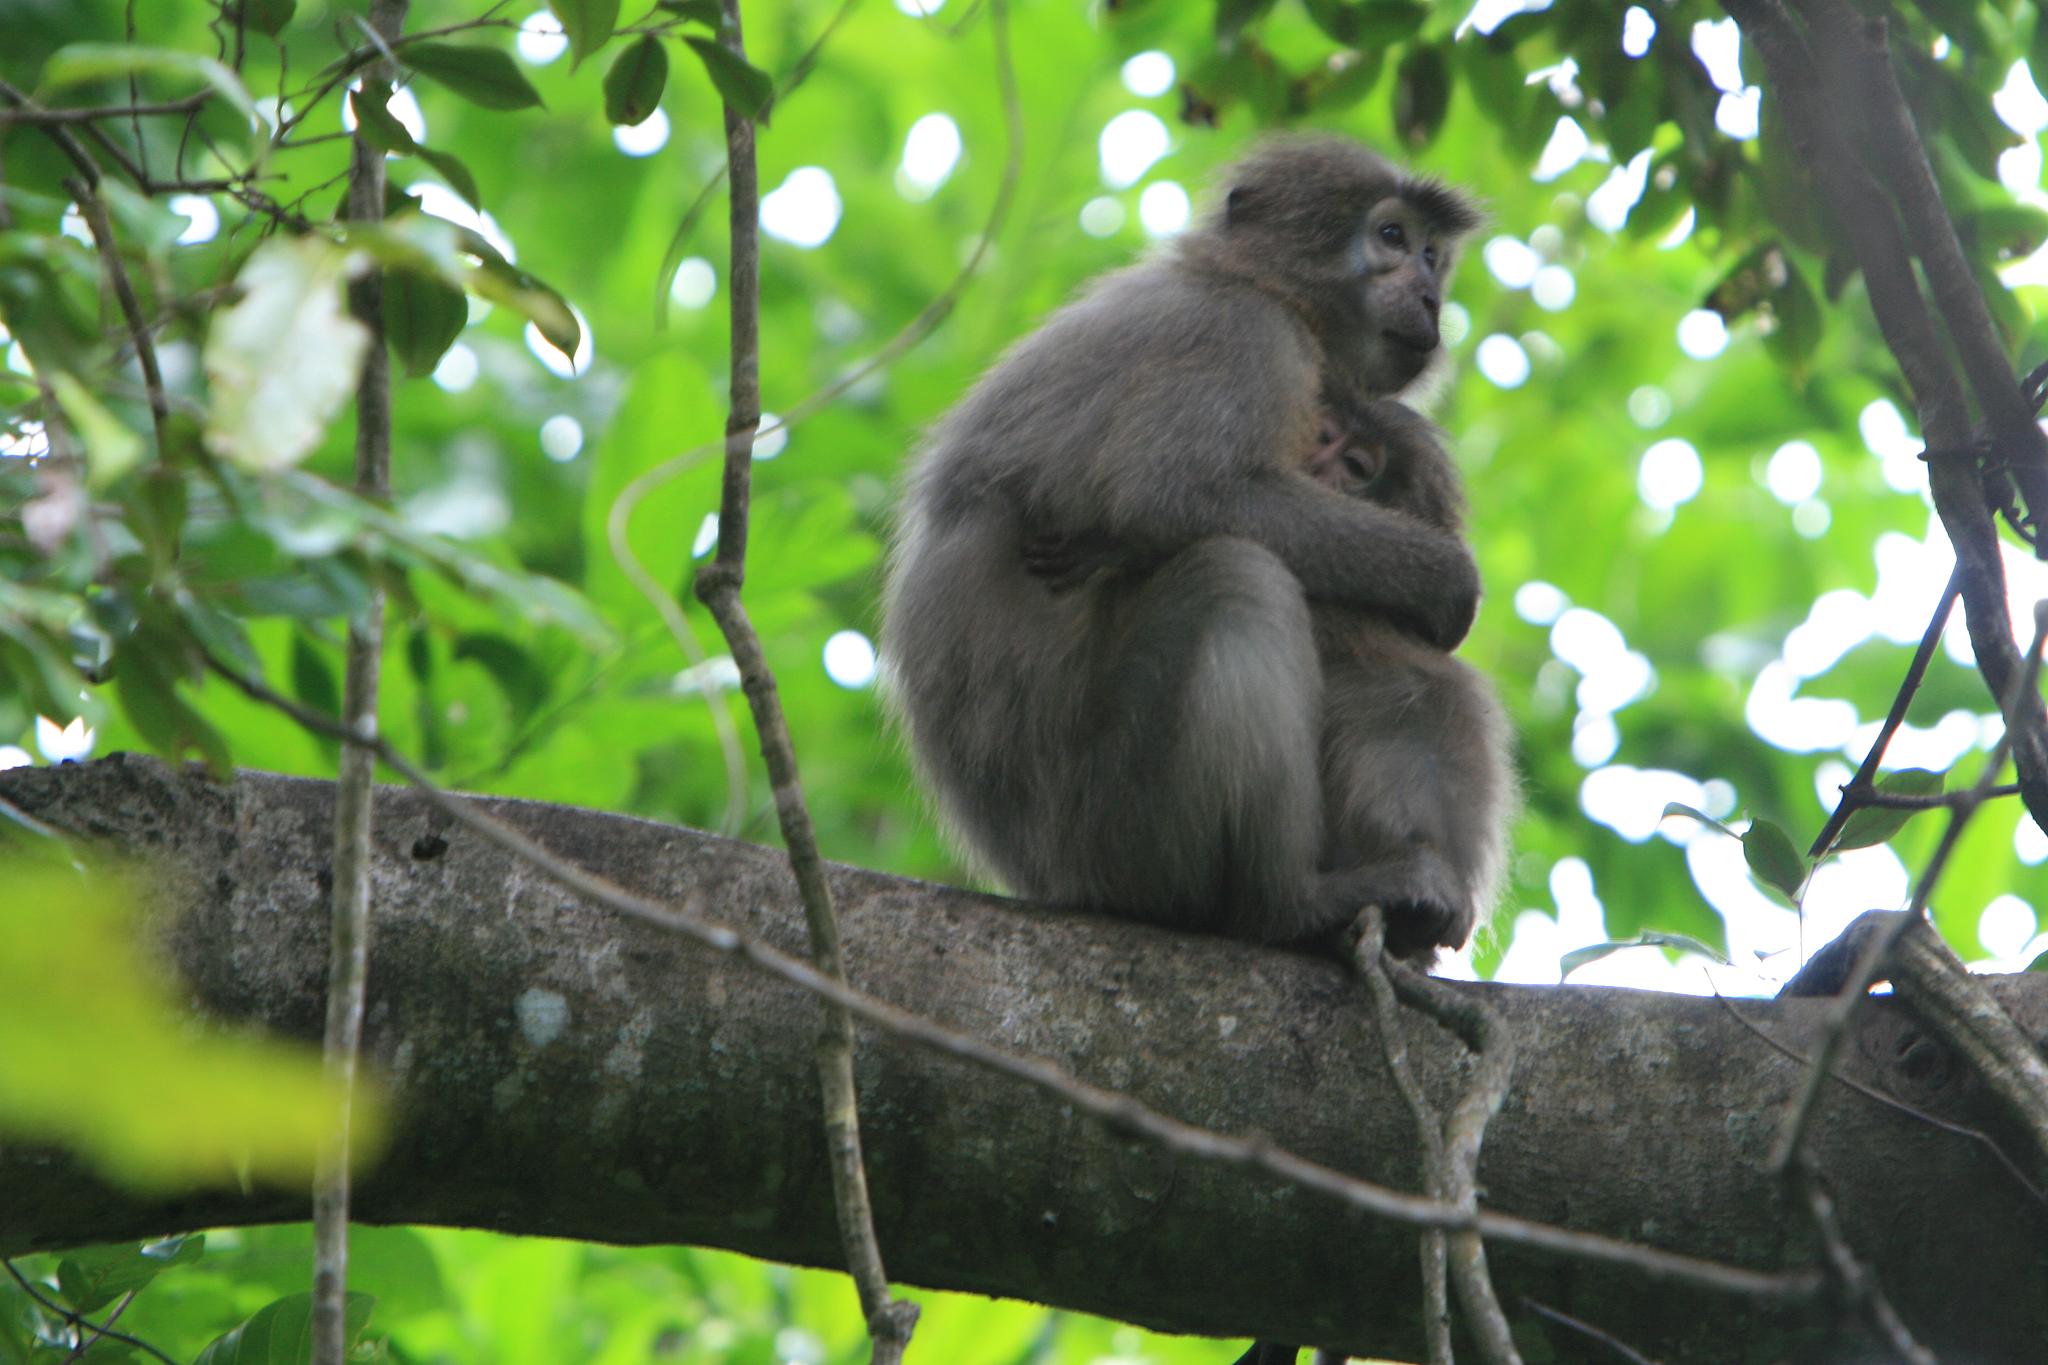 a monkey on a tree limb in the forest